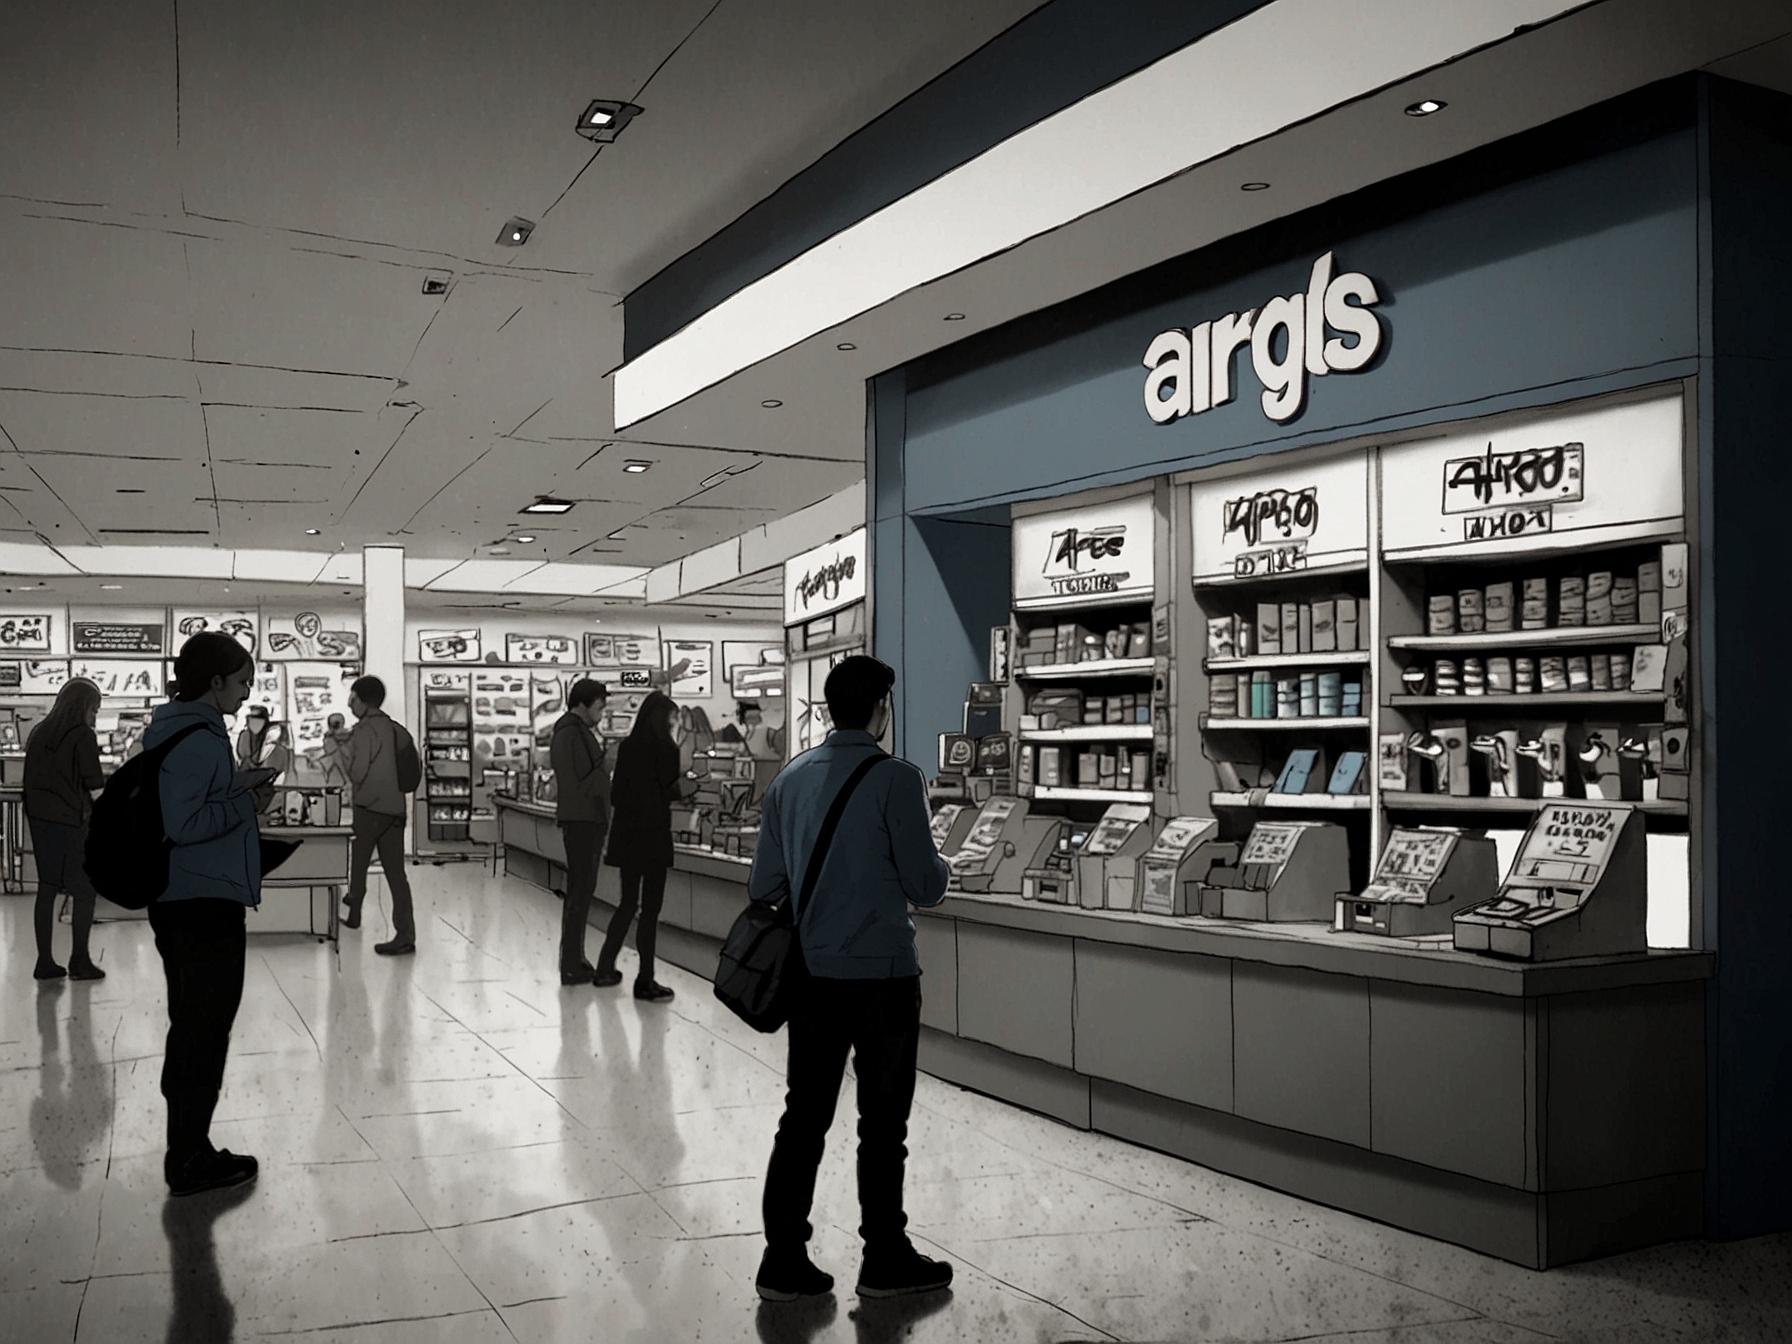 An image showcasing an Argos display with fewer customers, underscoring the decline in non-essential item sales and the need for rate cuts to encourage consumer spending.